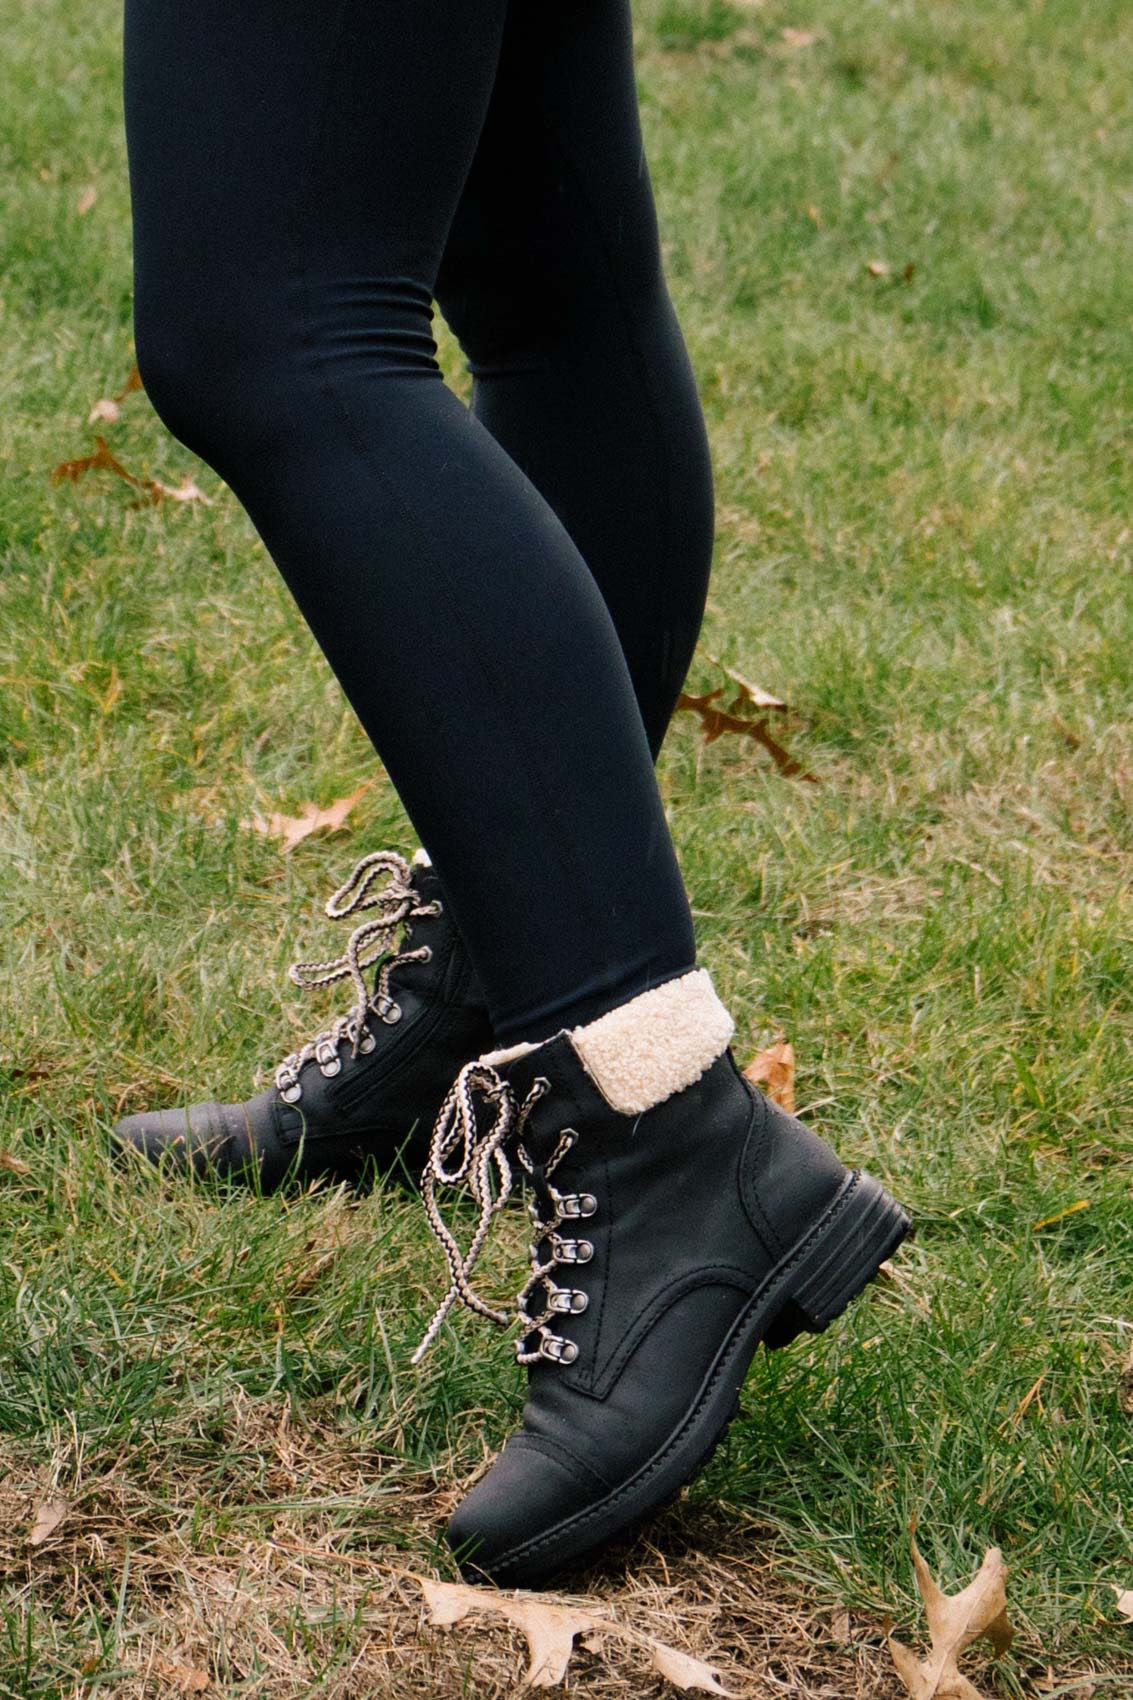 black-cute-hiking-boots-report-shoes-lr-1 - Allyn Lewis